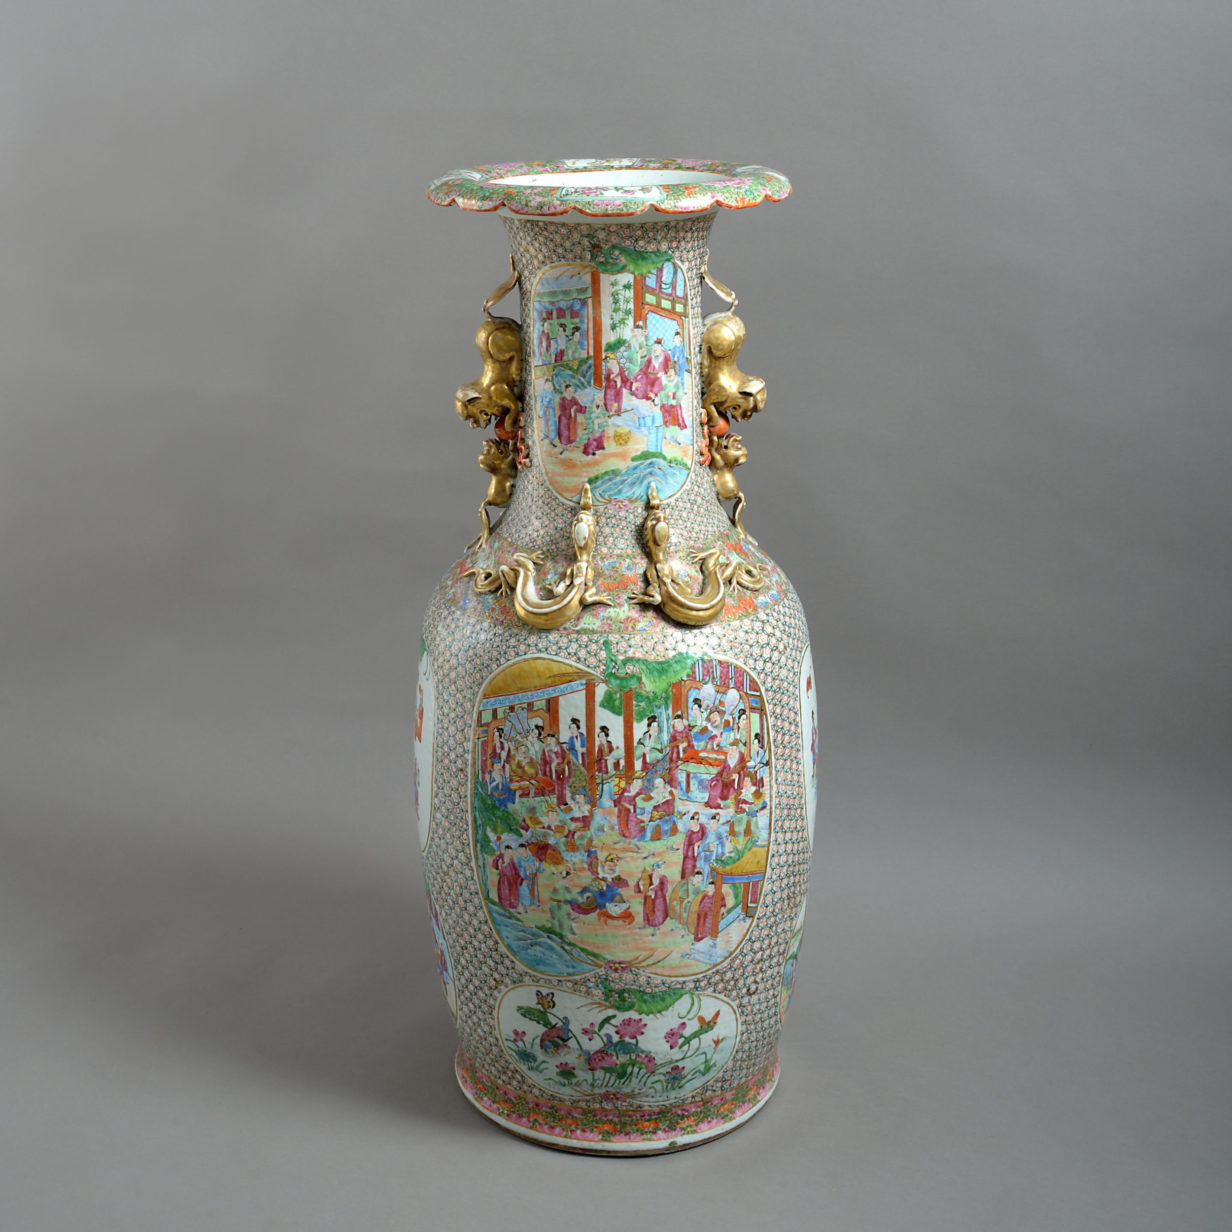 A large 19th century famille rose soldier vase